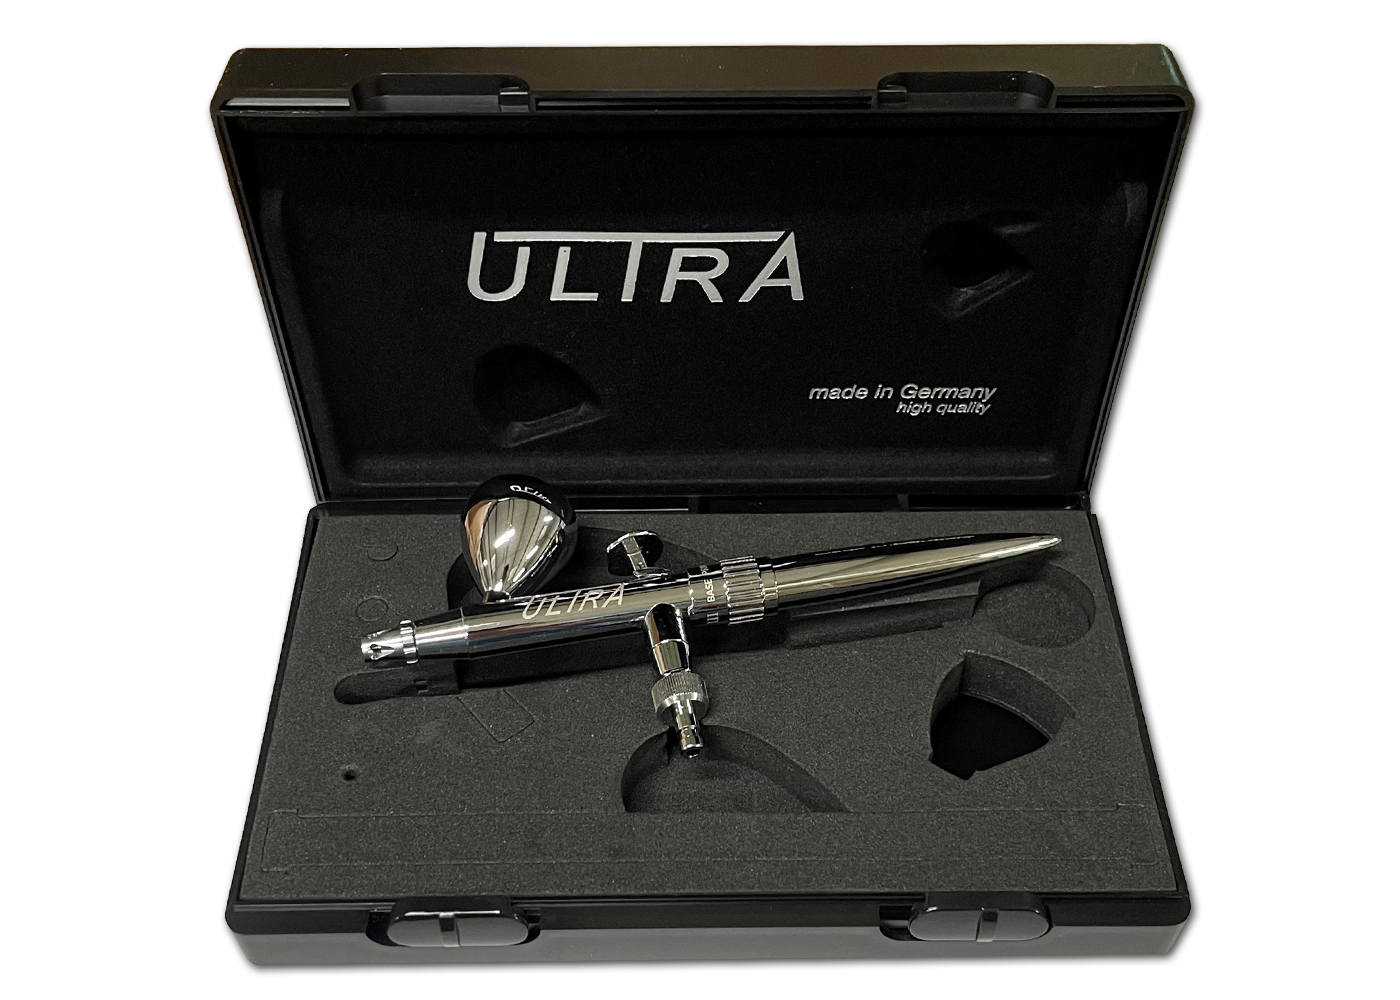 Harder & Steenbeck Ultra X (suction feed) Airbrush Brand New